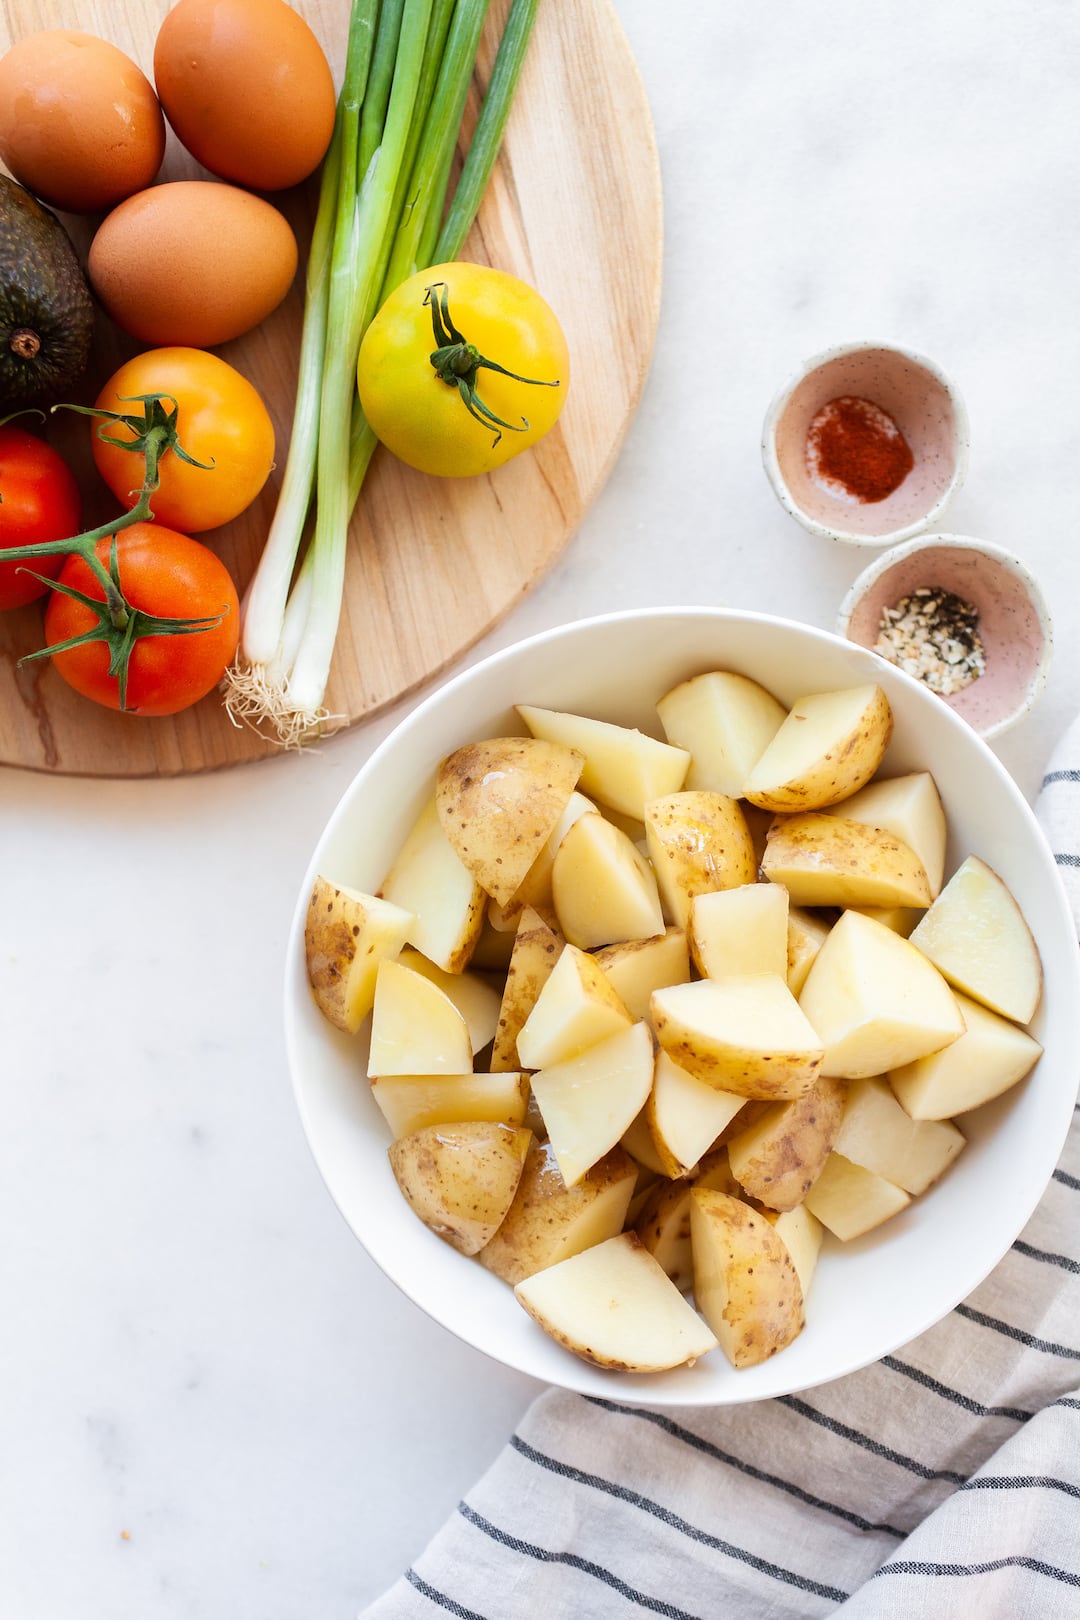 Ingredients for Potatoes in an Air Fryer